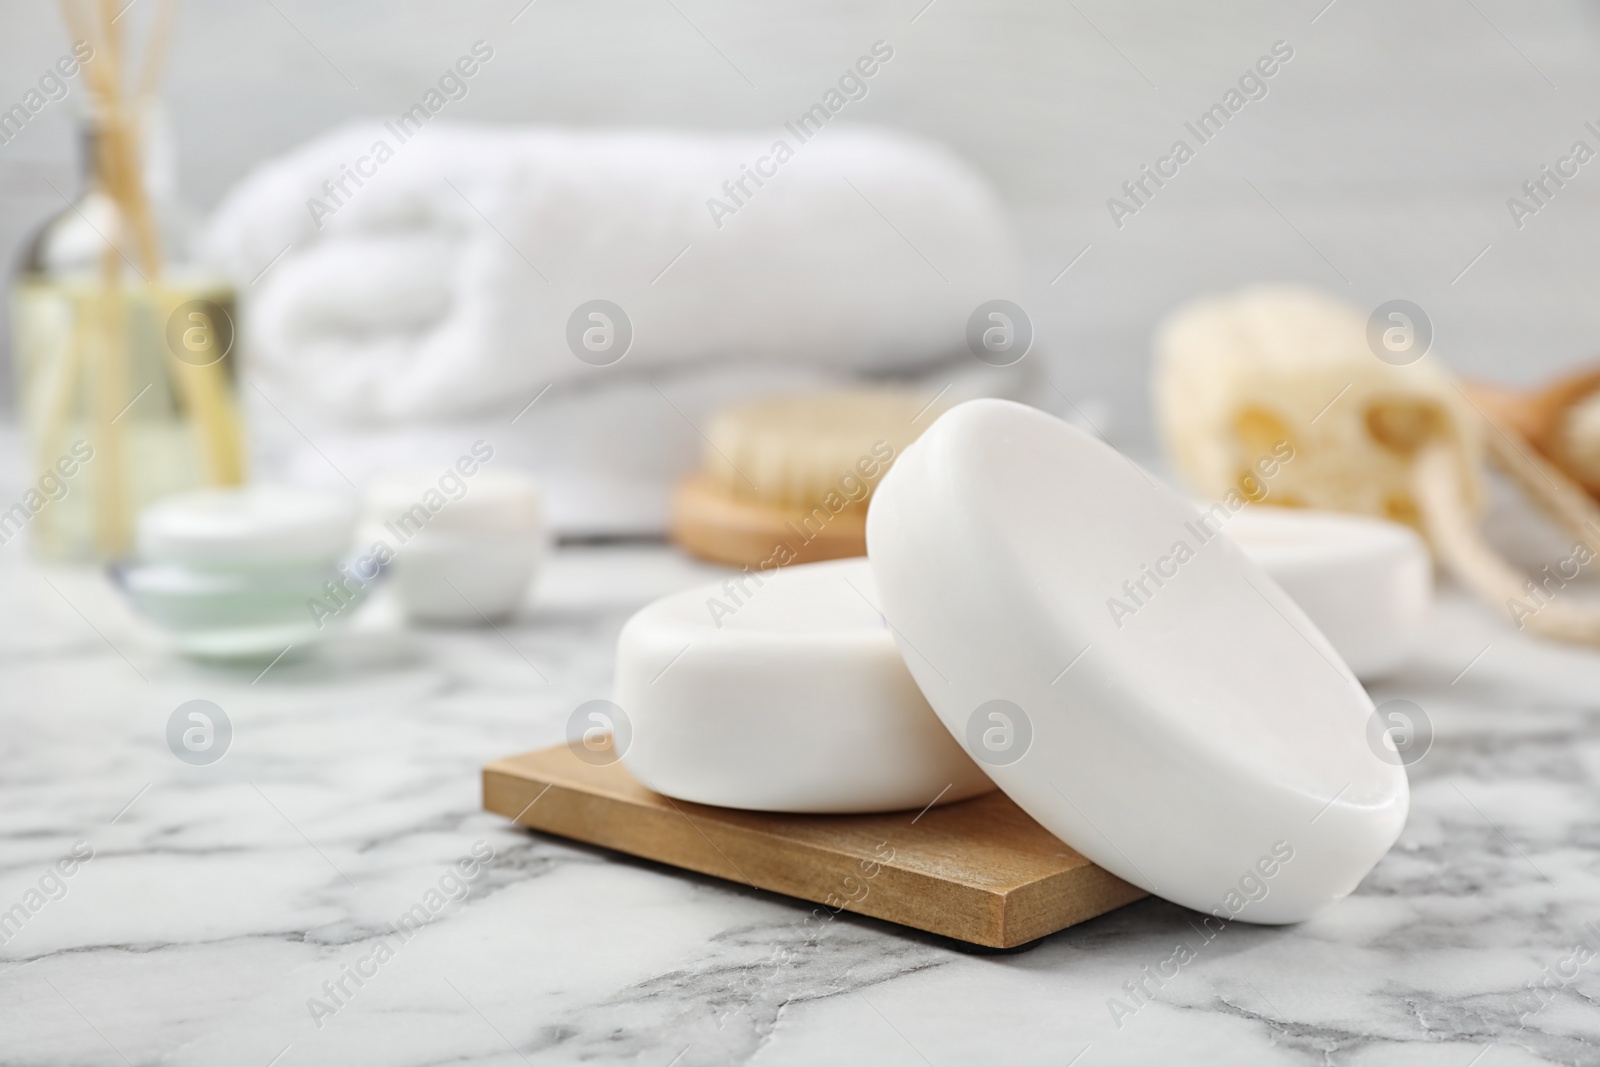 Photo of White soap bars on wooden deck in bathroom, closeup